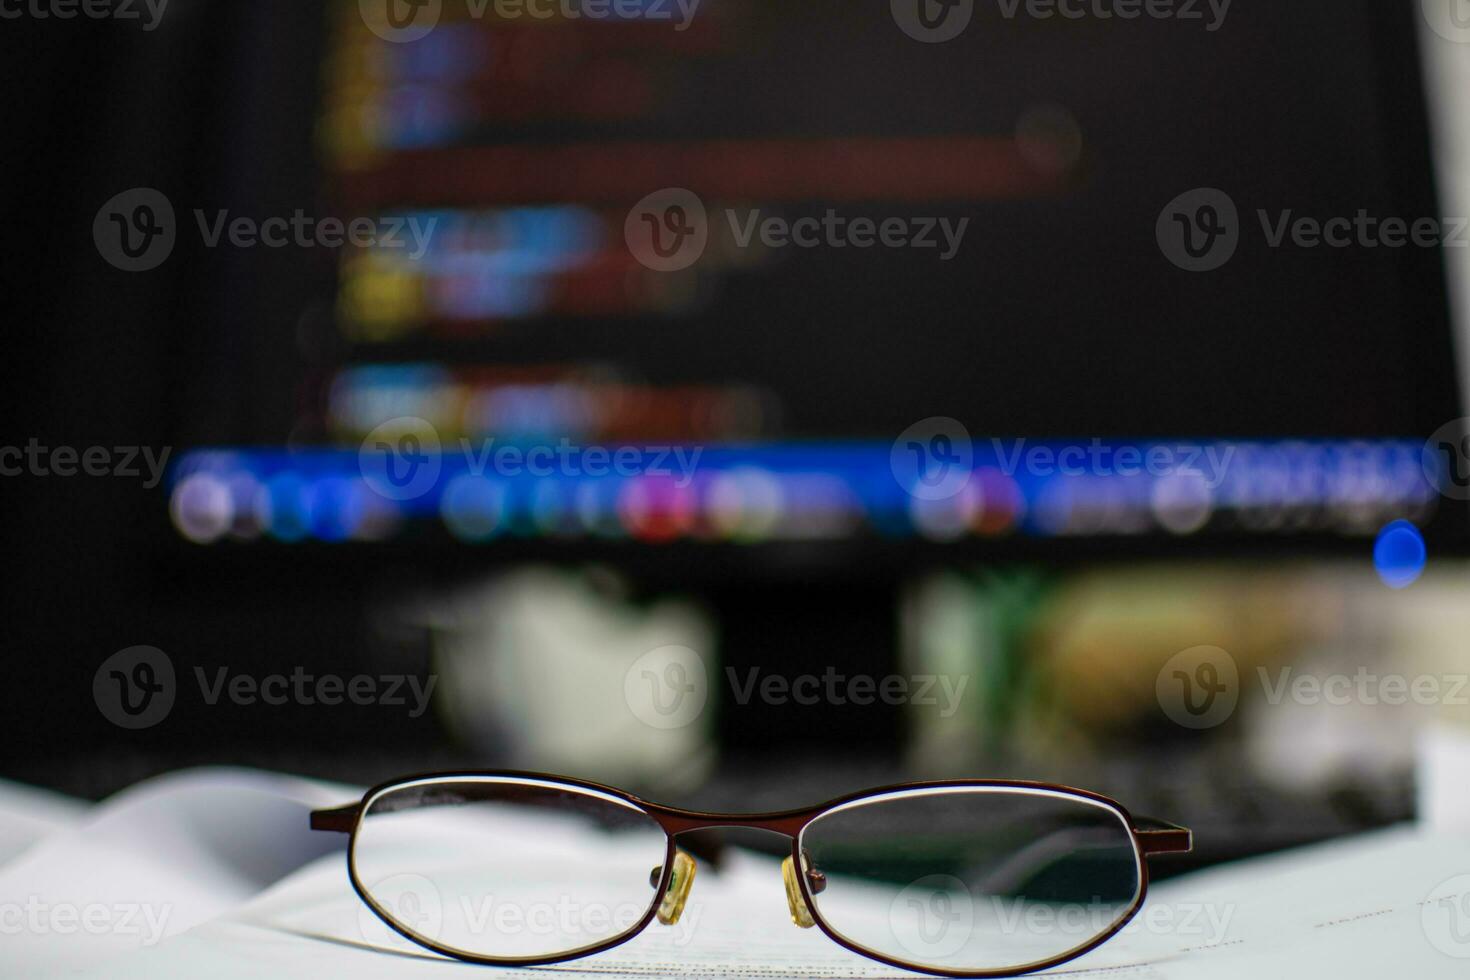 Programmer's glasses put on the document to relax after long coding for application creation and website design for businesses with a focus on cybersecurity. tack closeup photo and blurred background